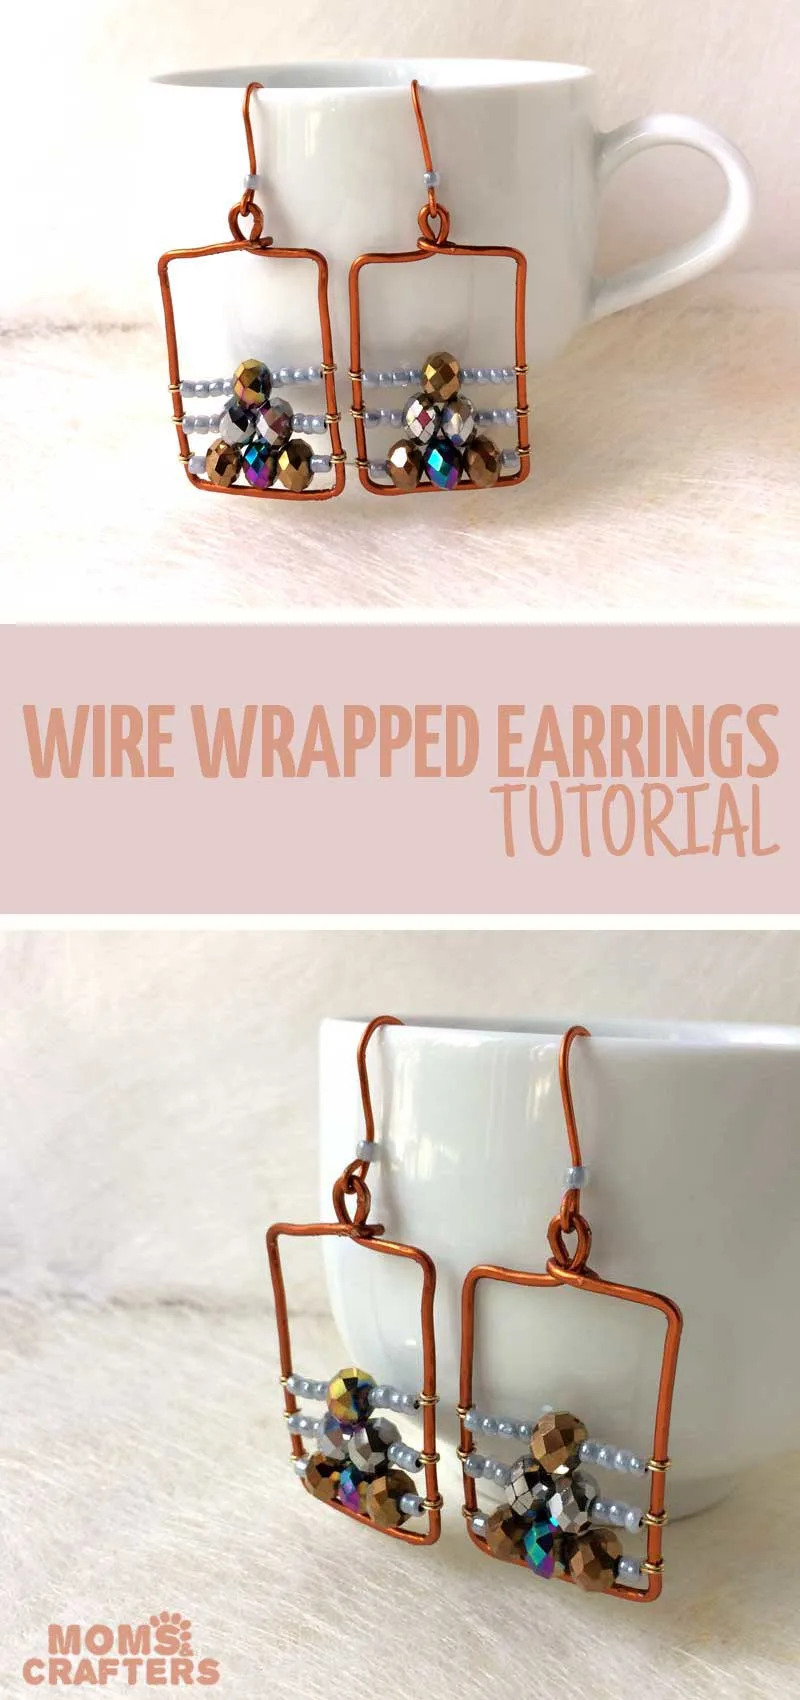 Beautiful, classy wire wrapped earrings tutoiral for beginners (or experts...) These cool DIY earrings ideas are easy and a touch of Bohemian too. The simple pattern with stones and beads are easy to learn how to make. #diyjewelry #earrings #momsandcrafters